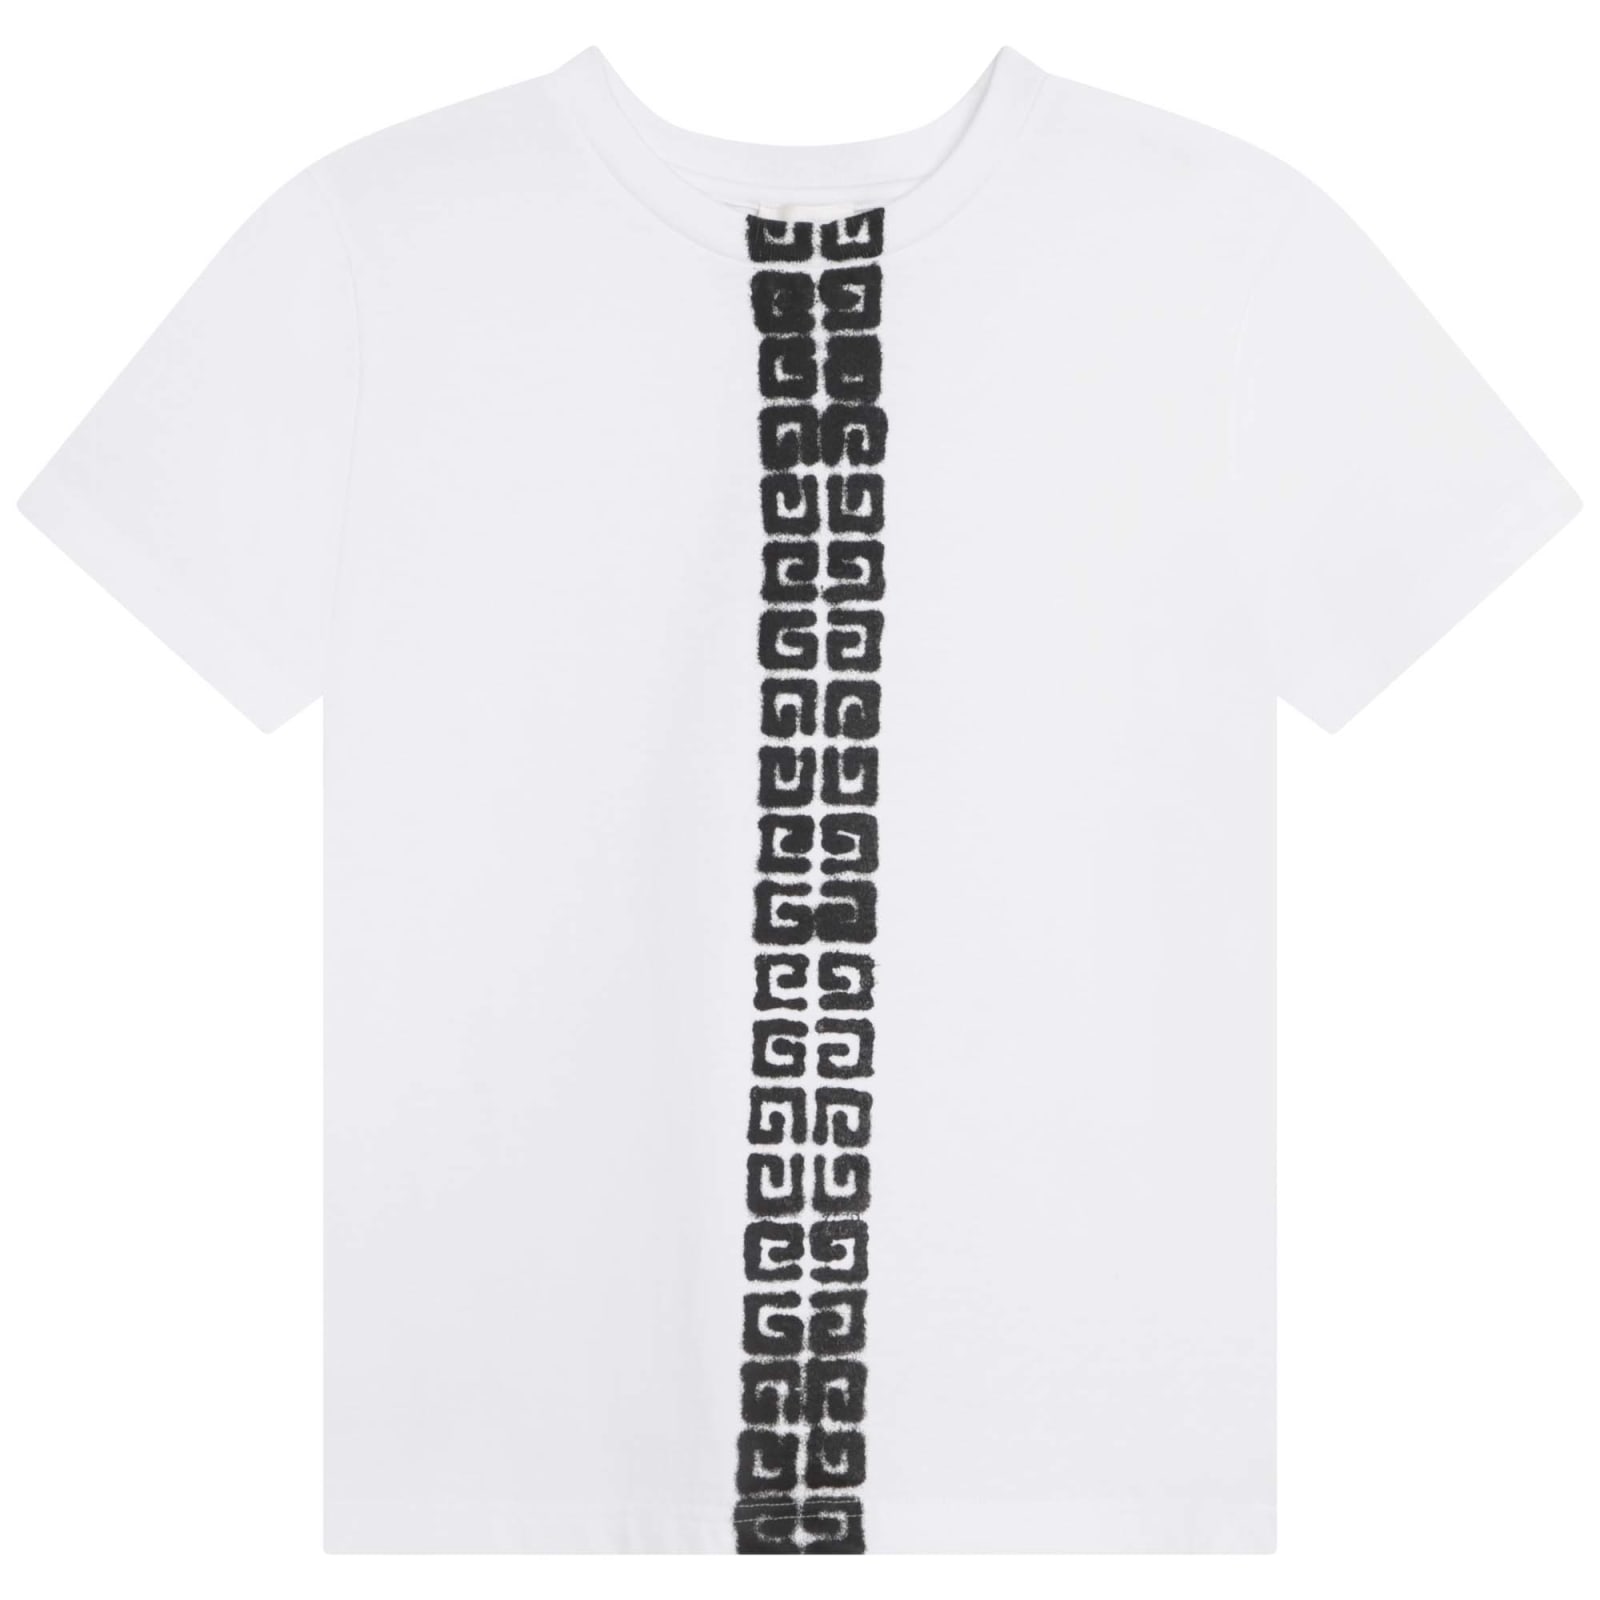 Givenchy T-shirt With Logo